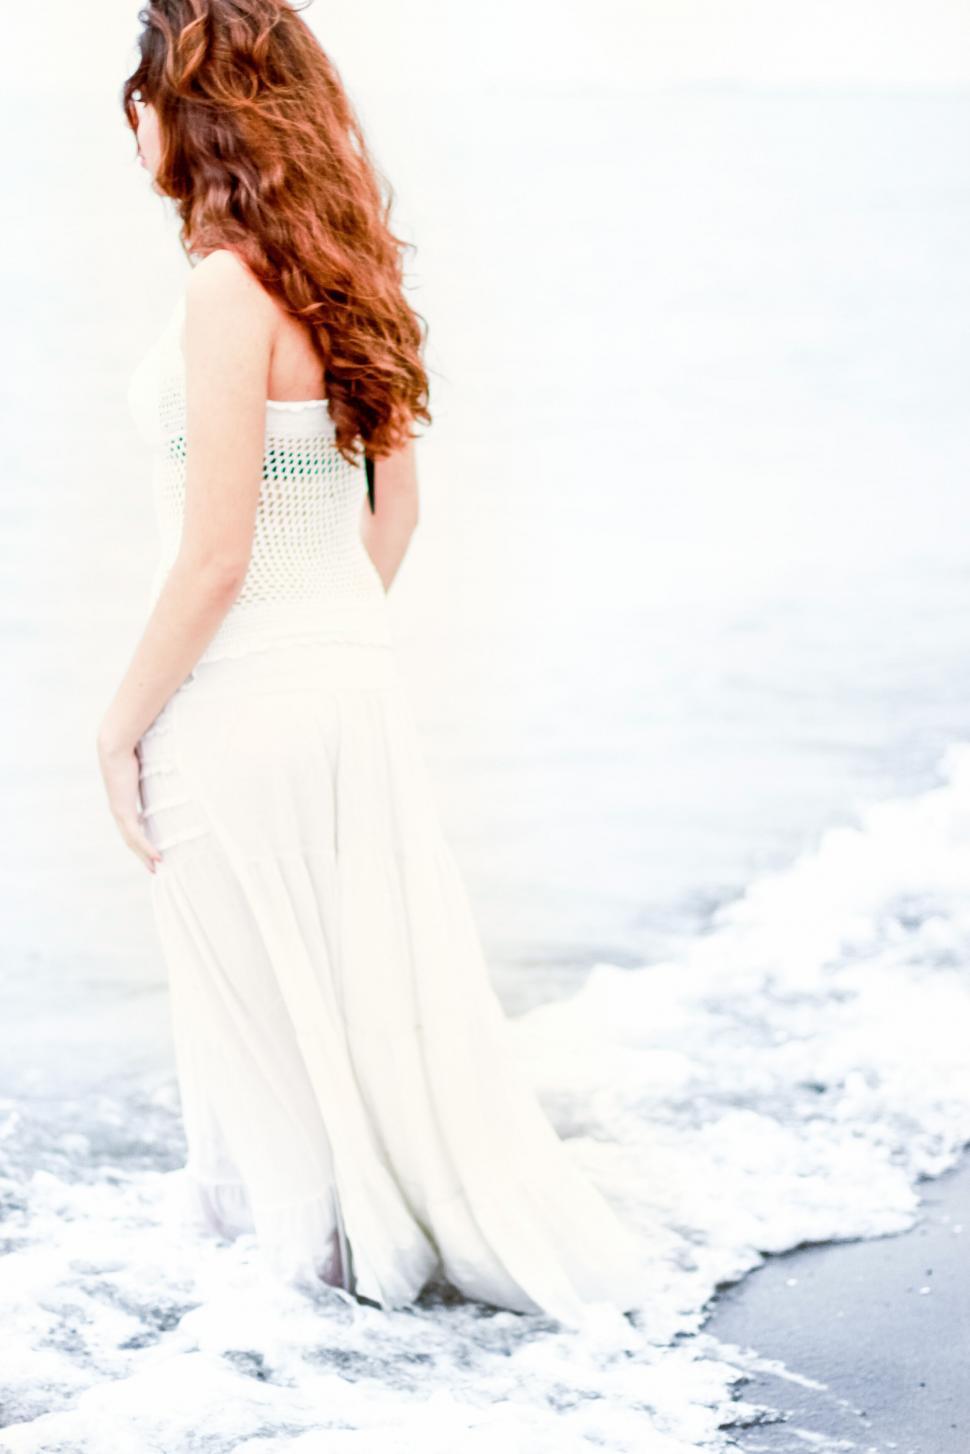 Free Image of A woman in a white dress standing in the water 